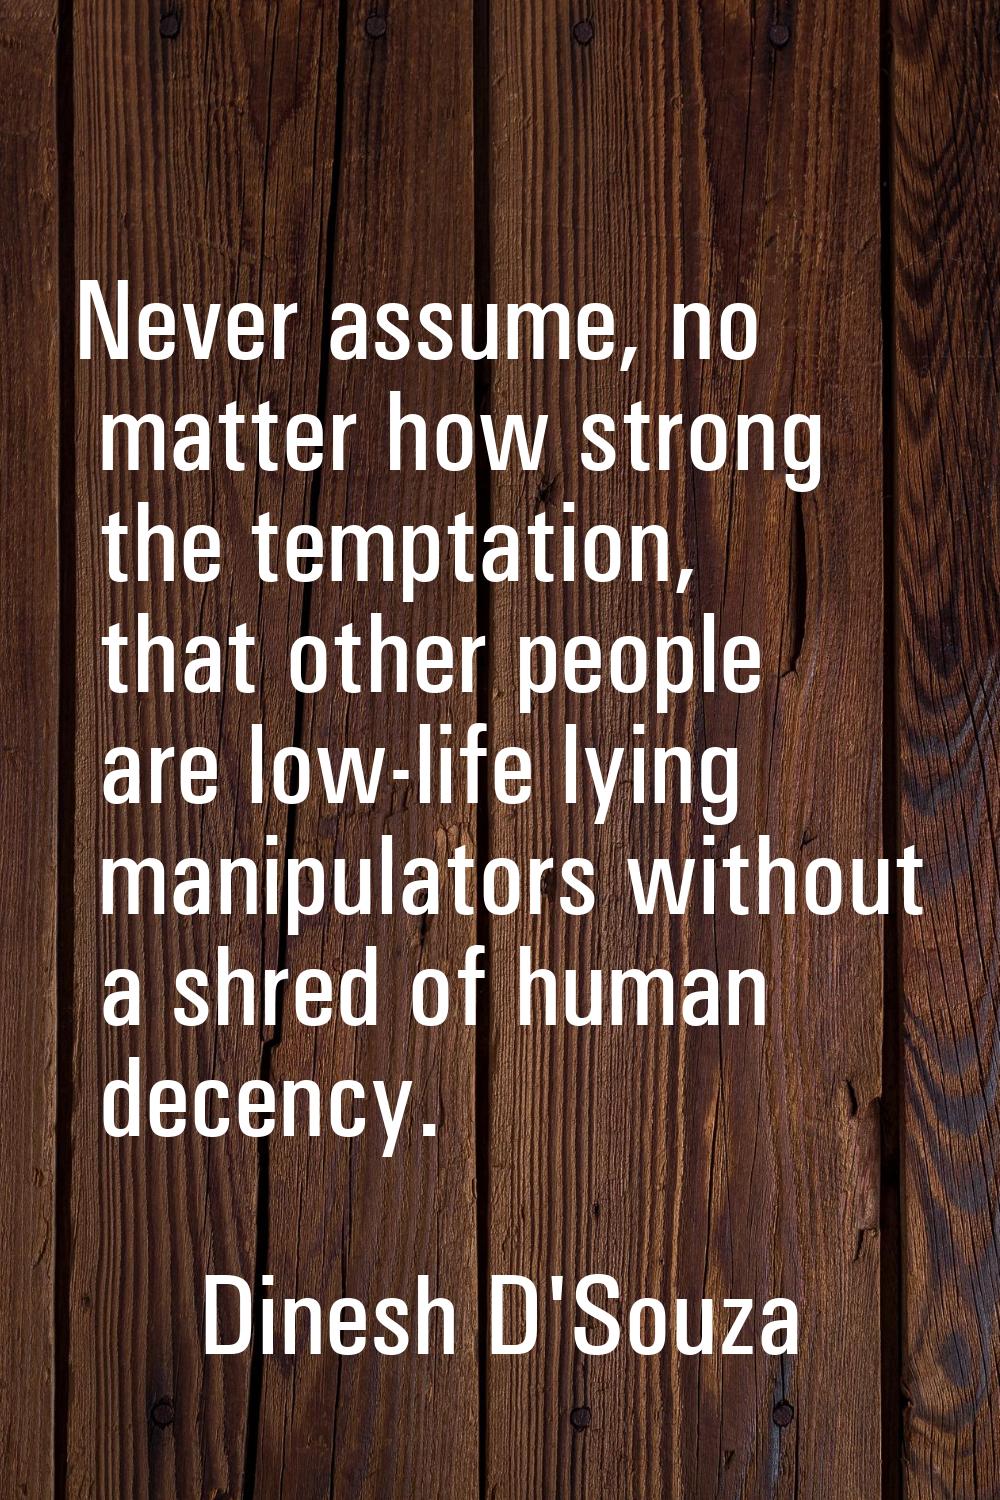 Never assume, no matter how strong the temptation, that other people are low-life lying manipulator